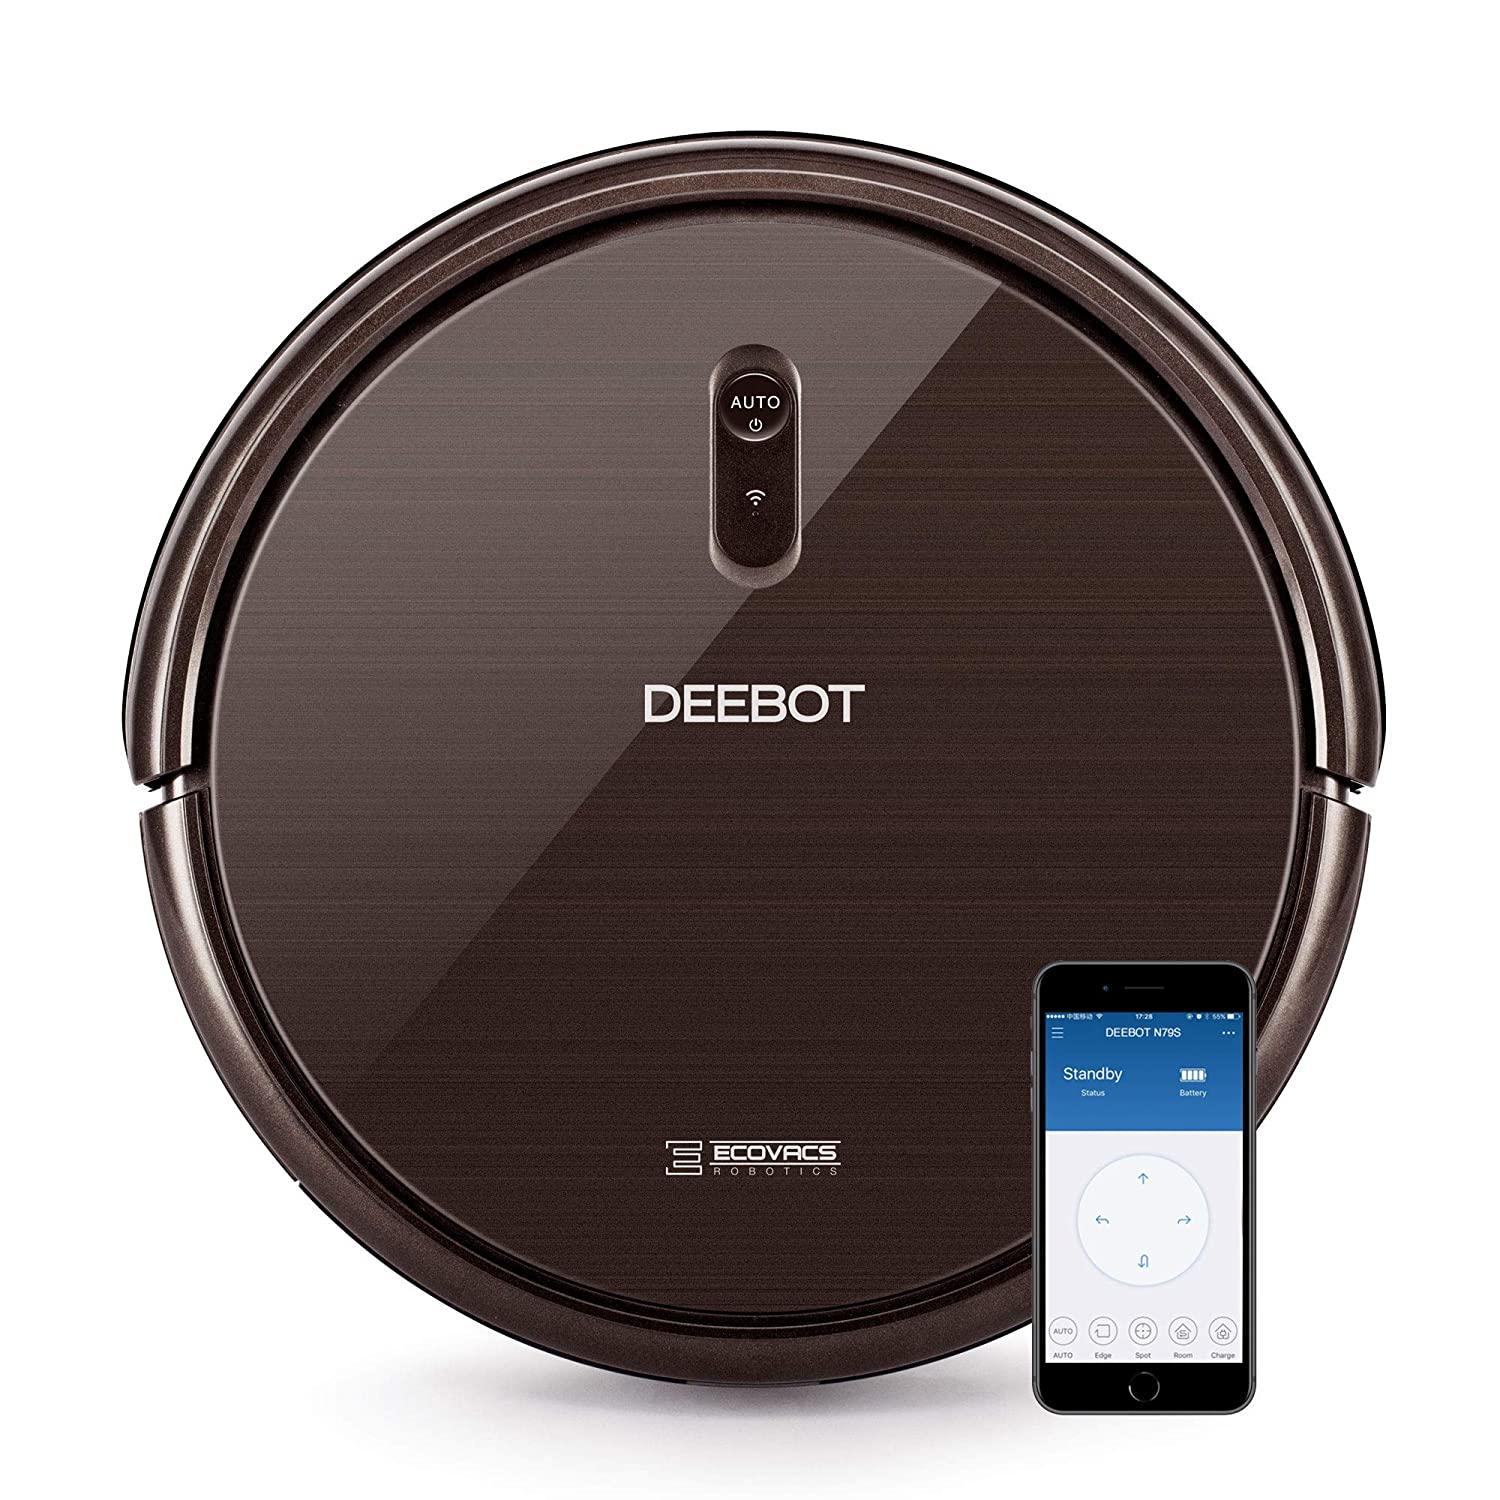 Ecovacs Deebot N79s WiFi Robotic Vacuum Cleaner for $89.99 Shipped